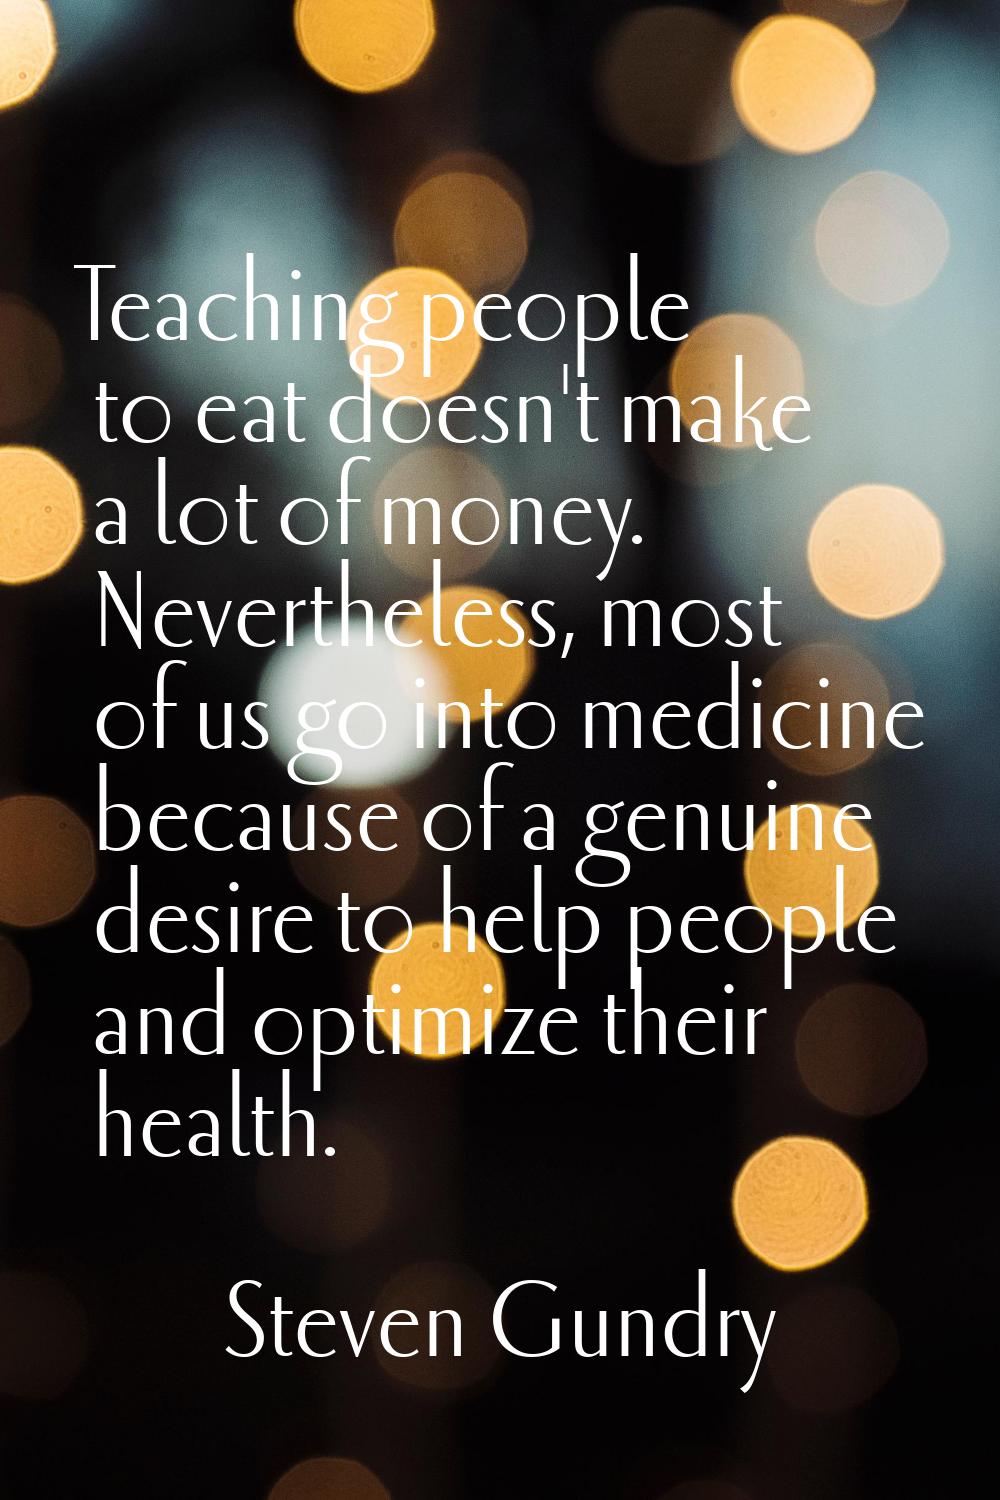 Teaching people to eat doesn't make a lot of money. Nevertheless, most of us go into medicine becau